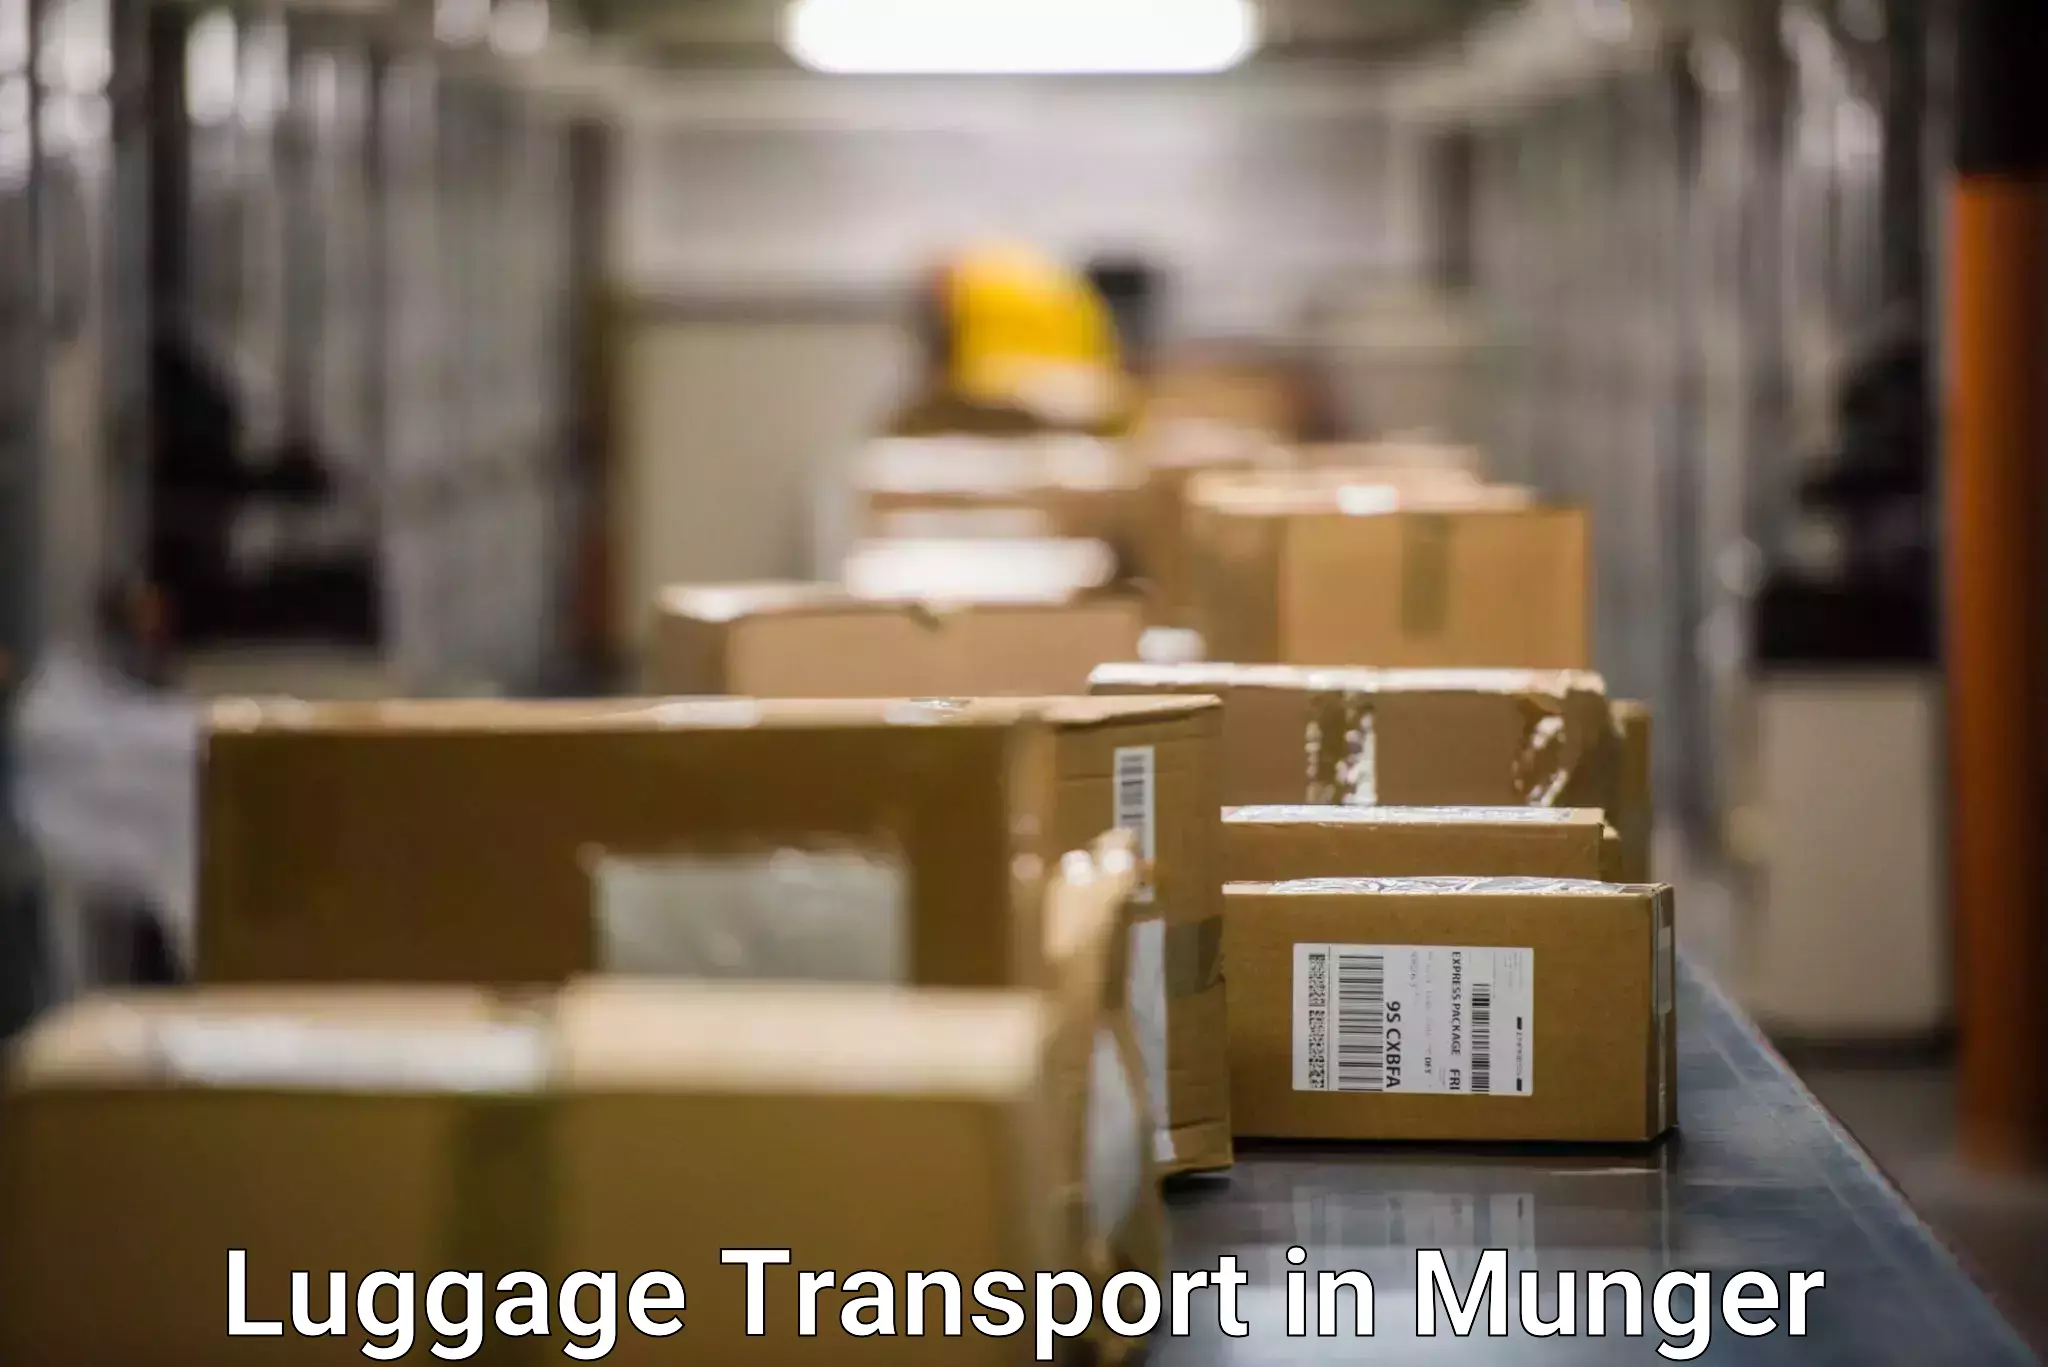 Corporate baggage transport in Munger